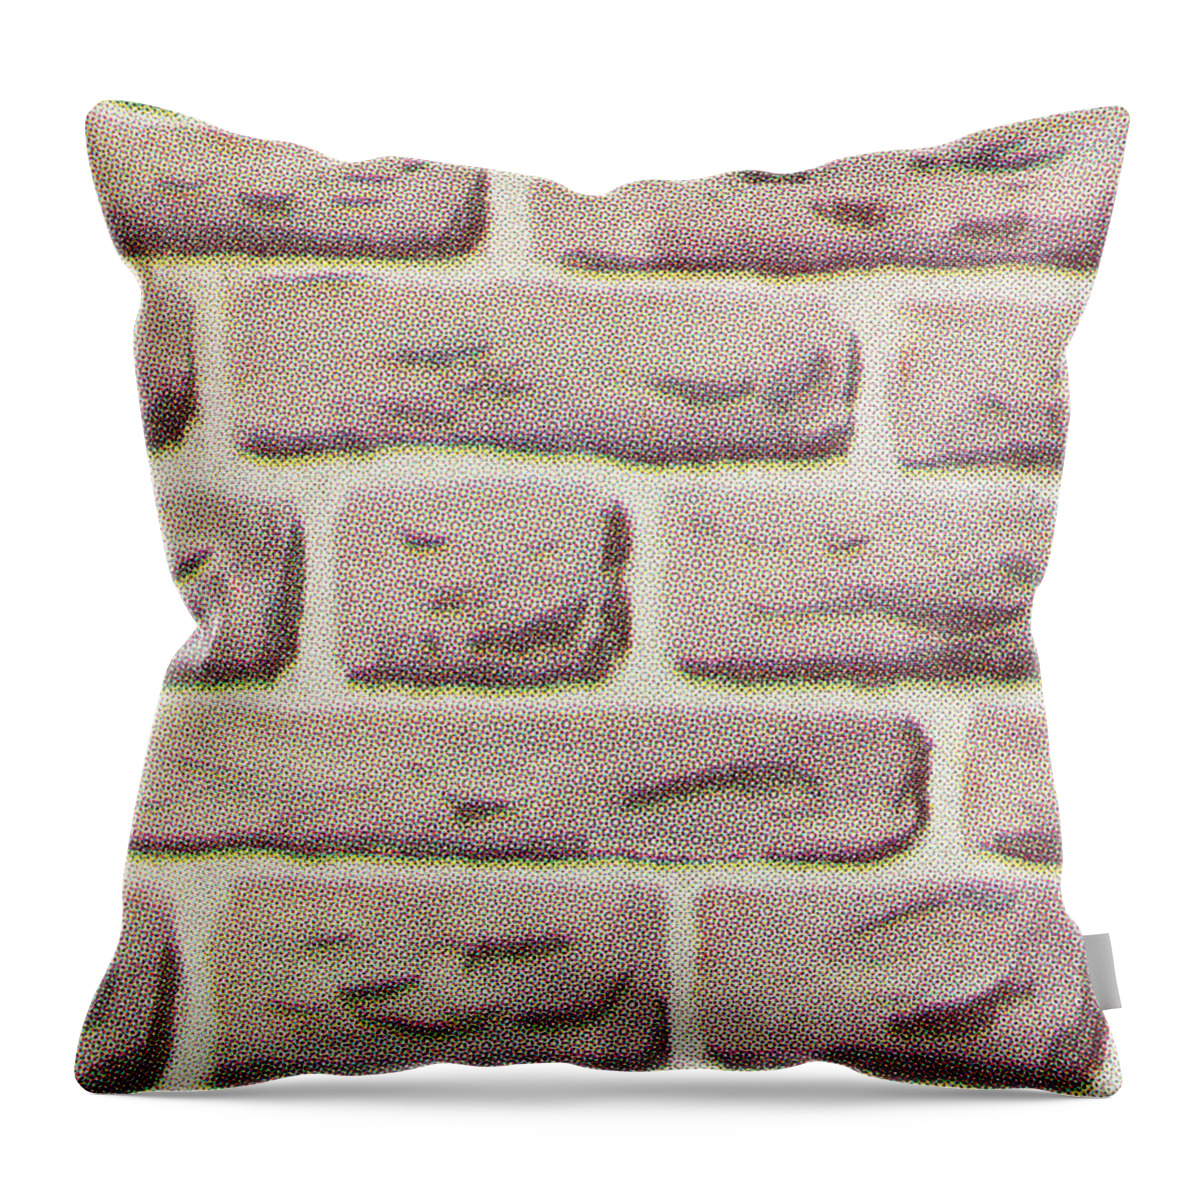 Background Throw Pillow featuring the drawing Brick Wall by CSA Images